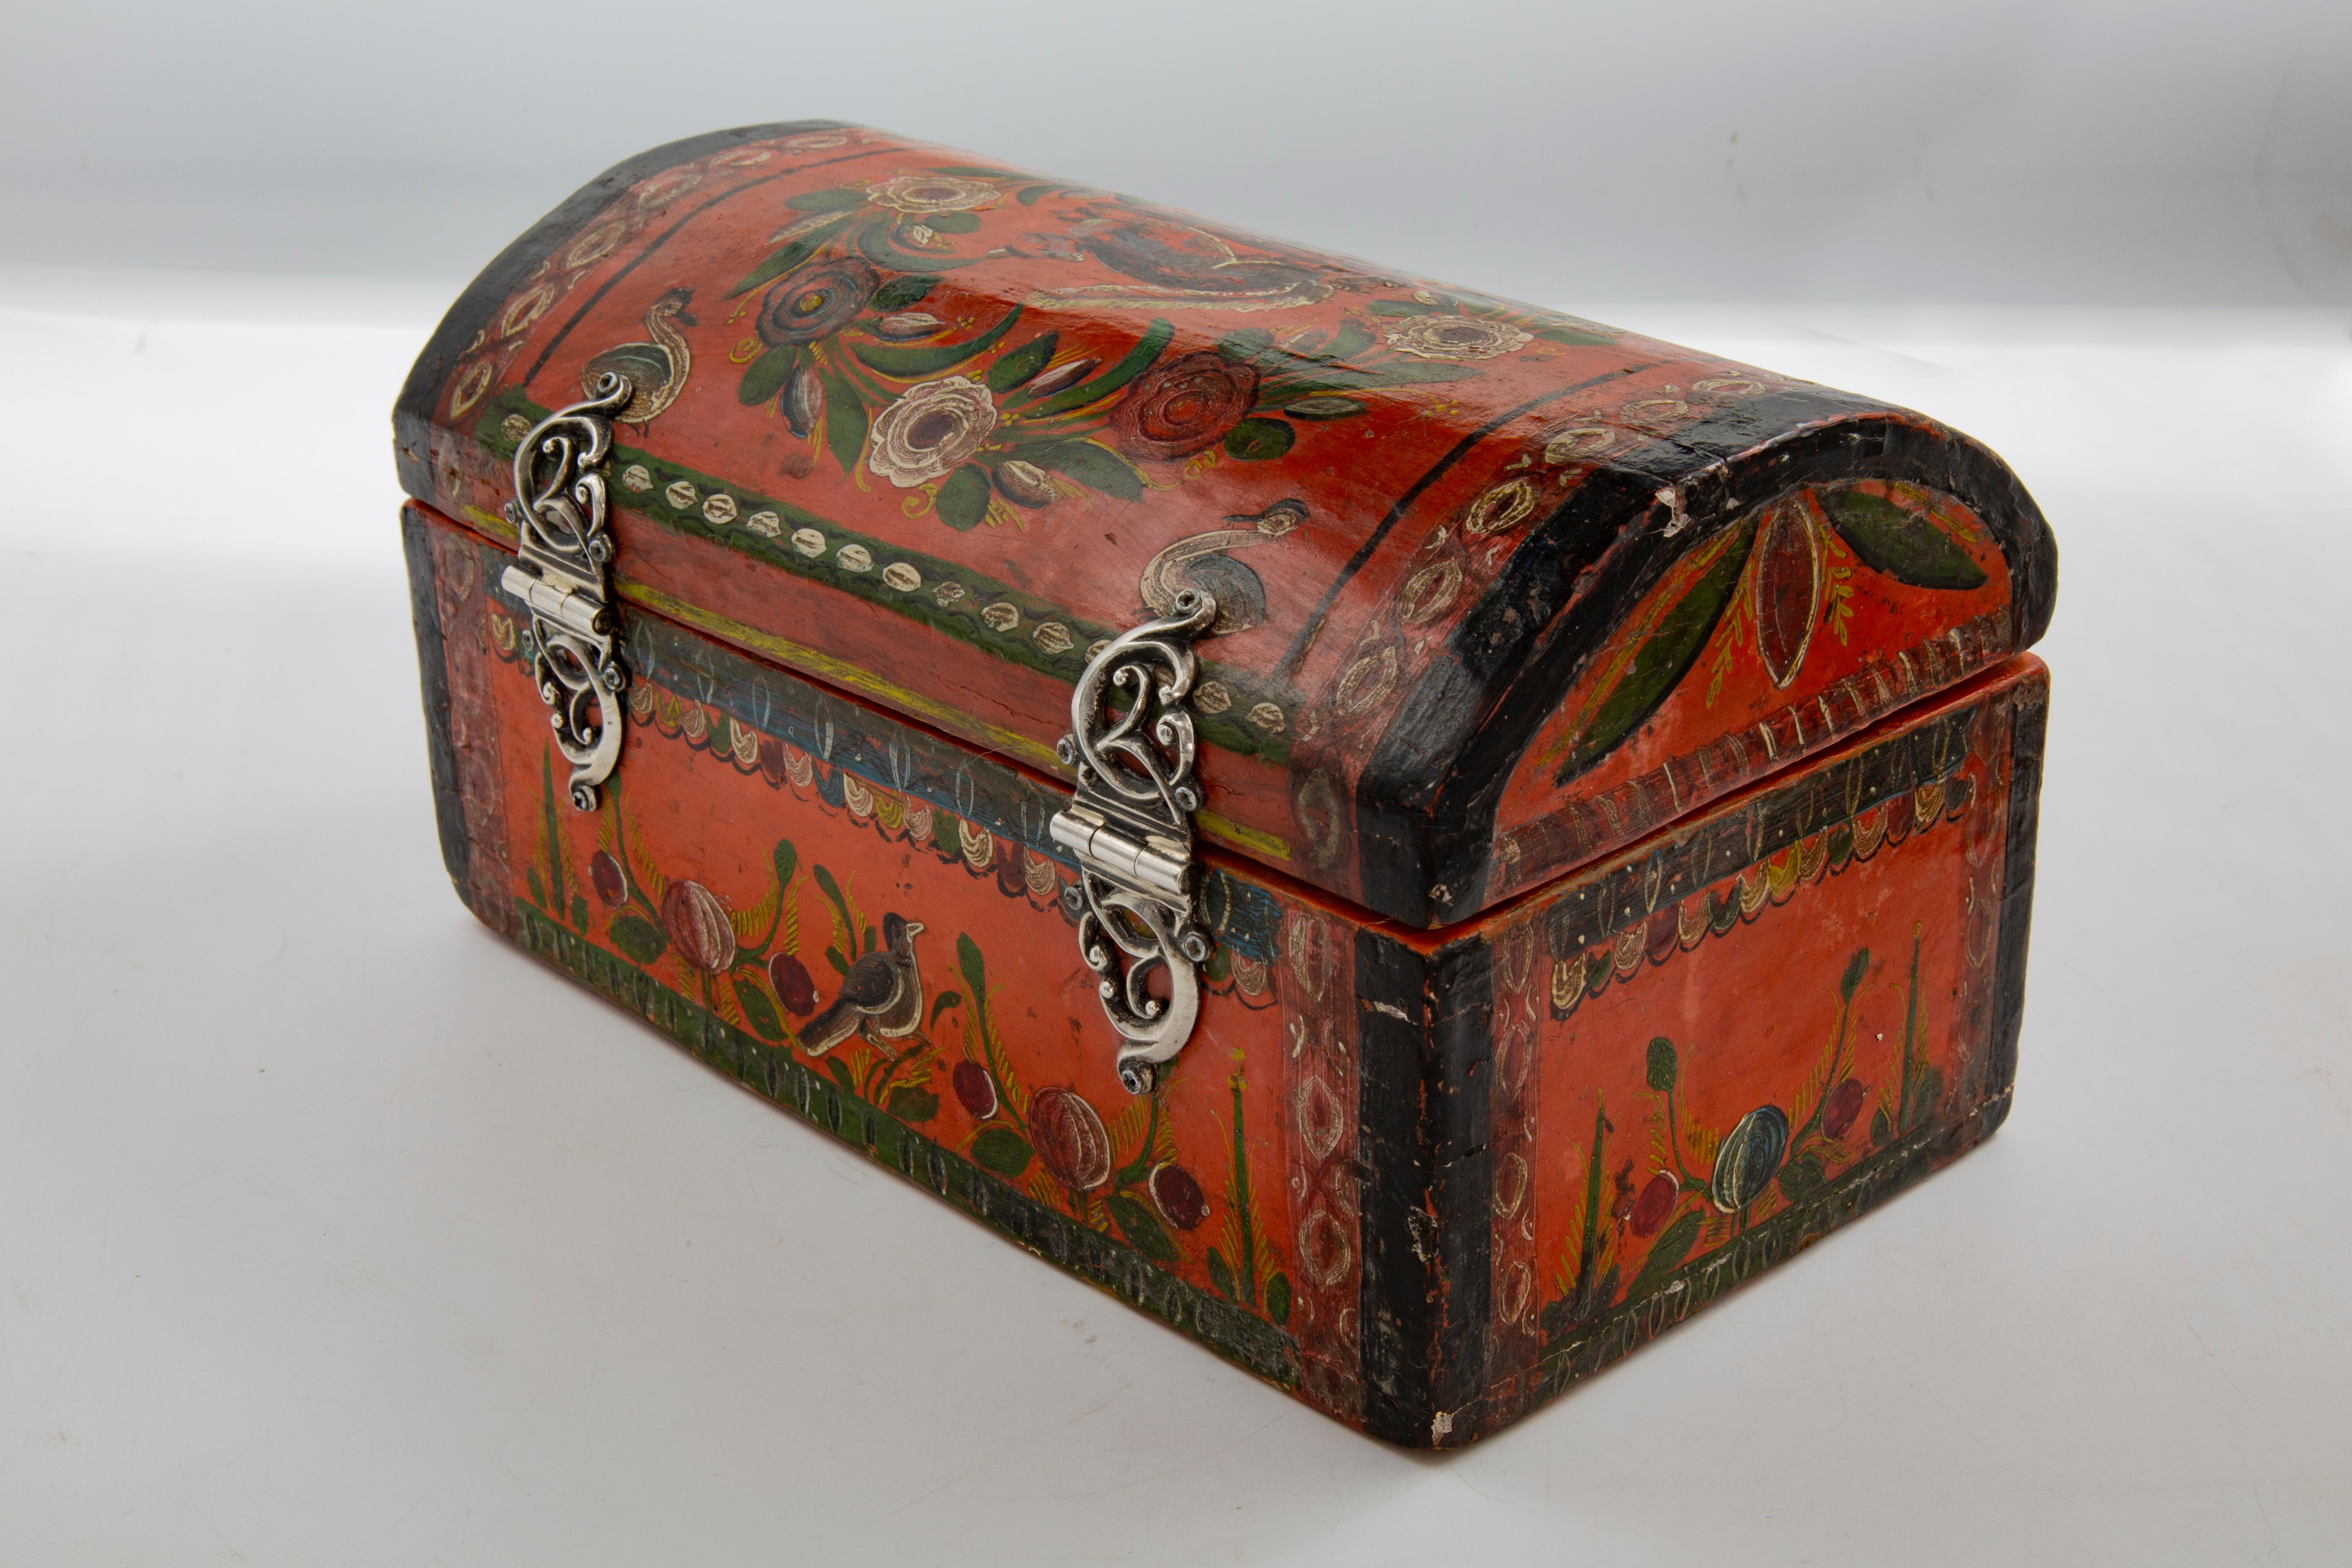 This hand painted box is representative of a technique
typical of the Olinalá region, in the state of Guerrero in the
South of Mexico.
Guerrero is the most important lacquer production center
in the country known as 